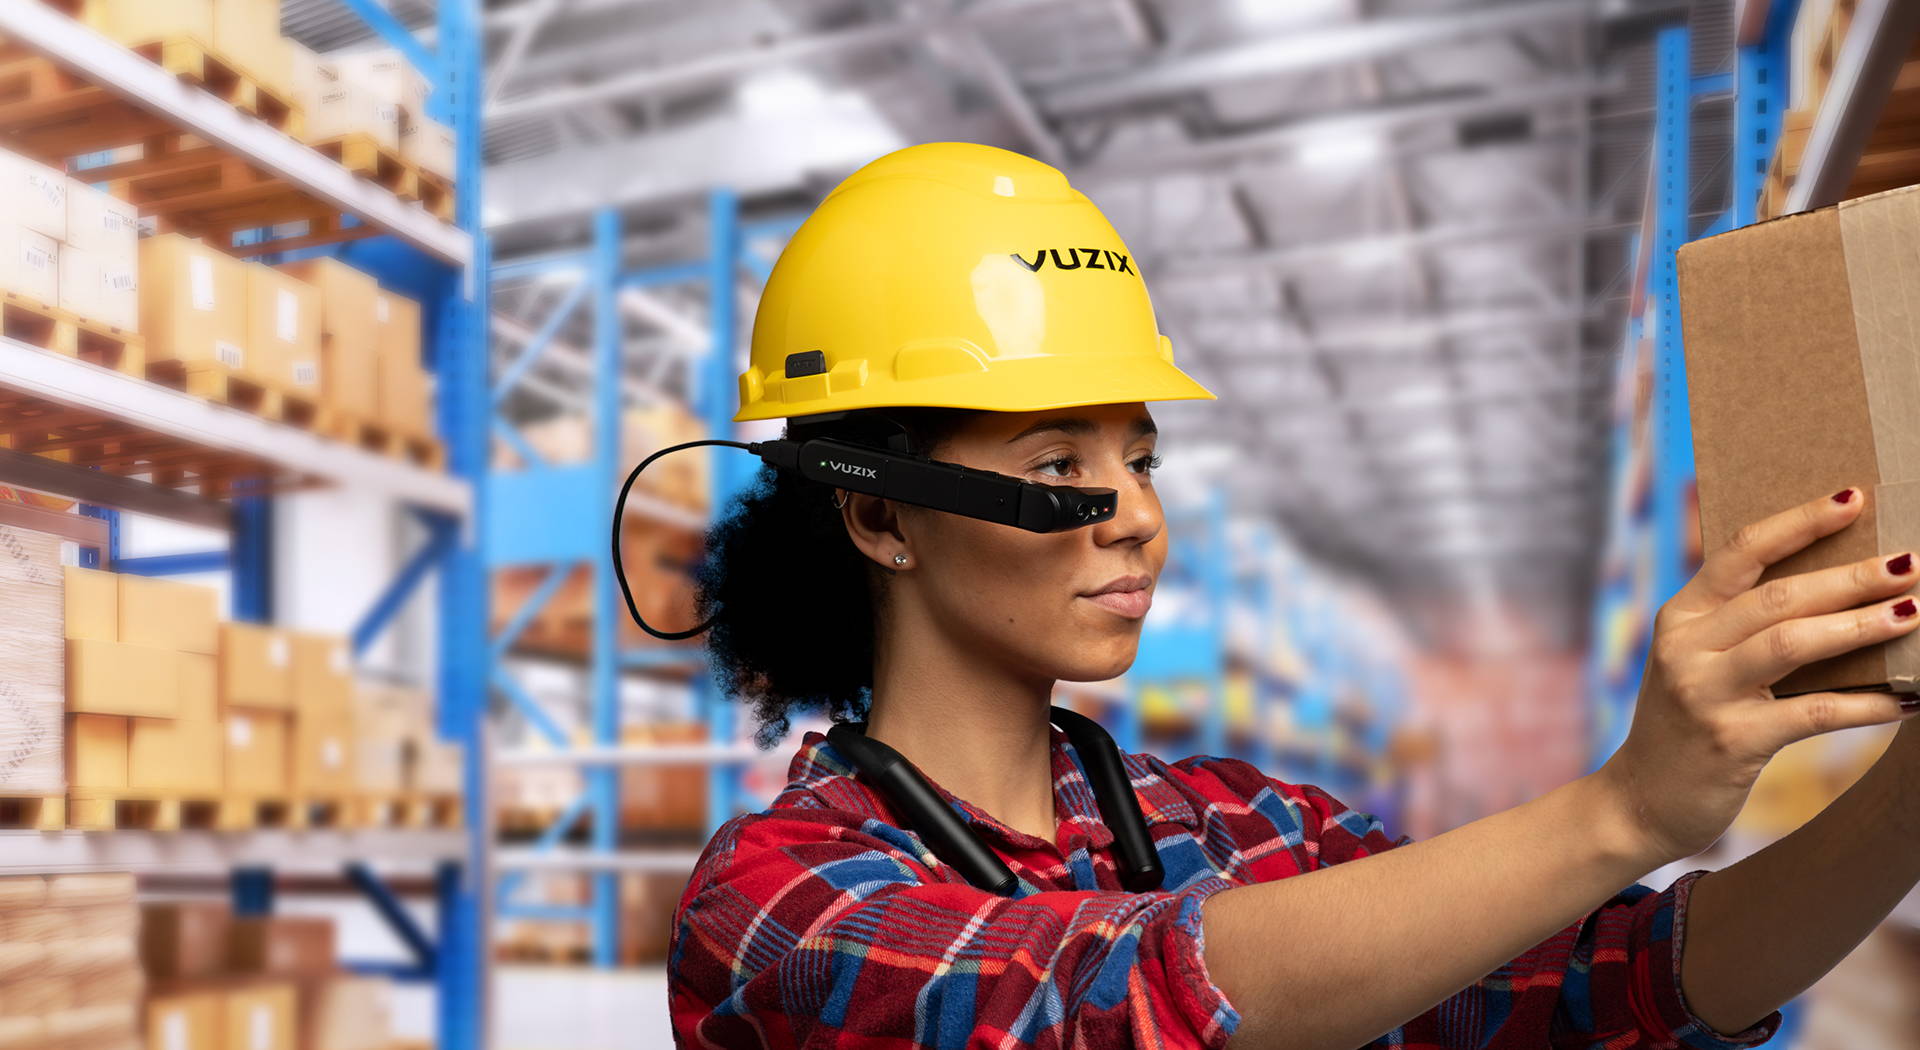 Young woman wearing Vuzix smart glasses mounted on a yellow hard hat scanning a box on a shelf in a warehouse.